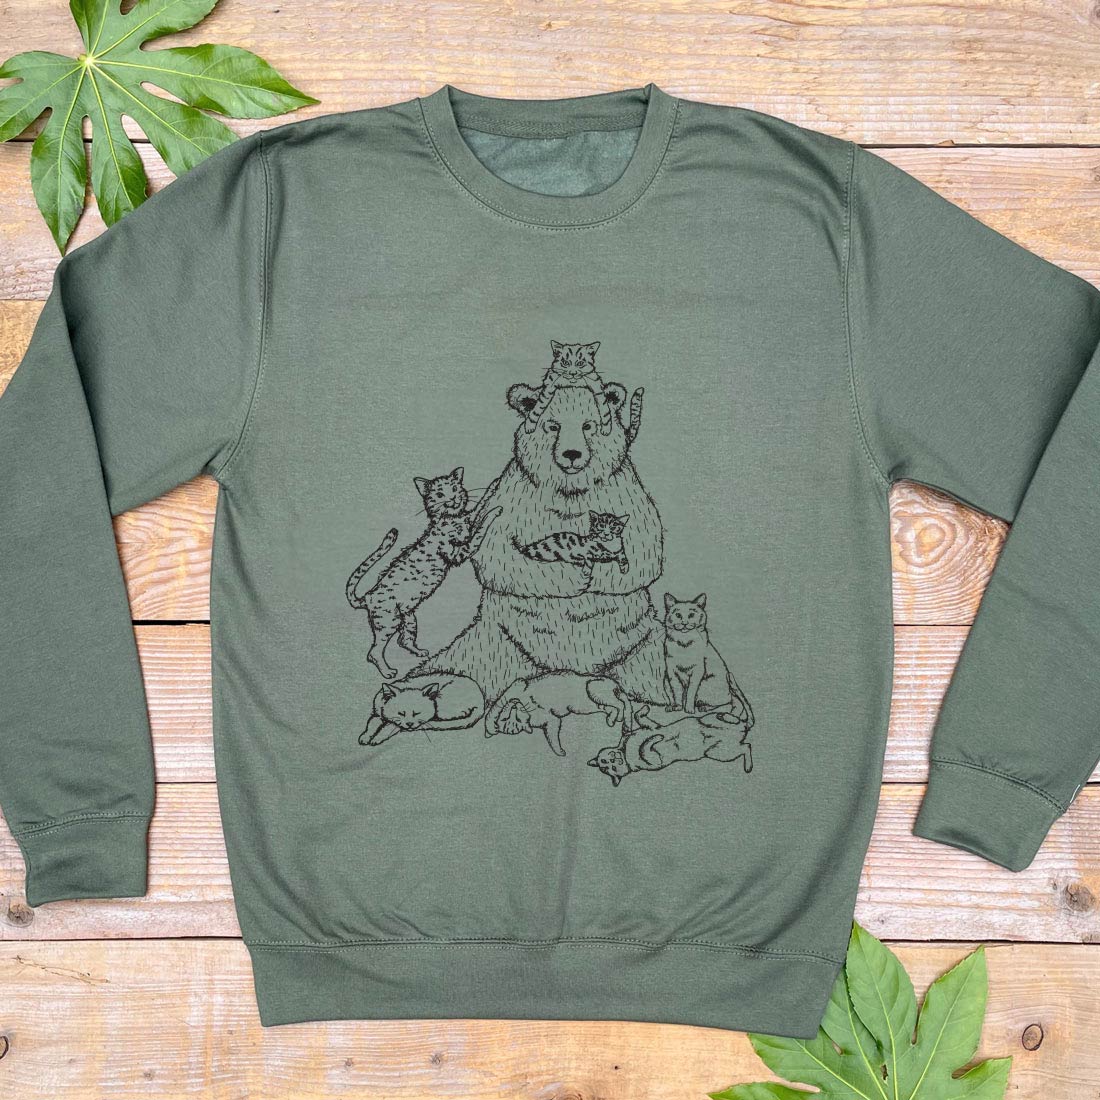 khaki green jumper with bear and cats